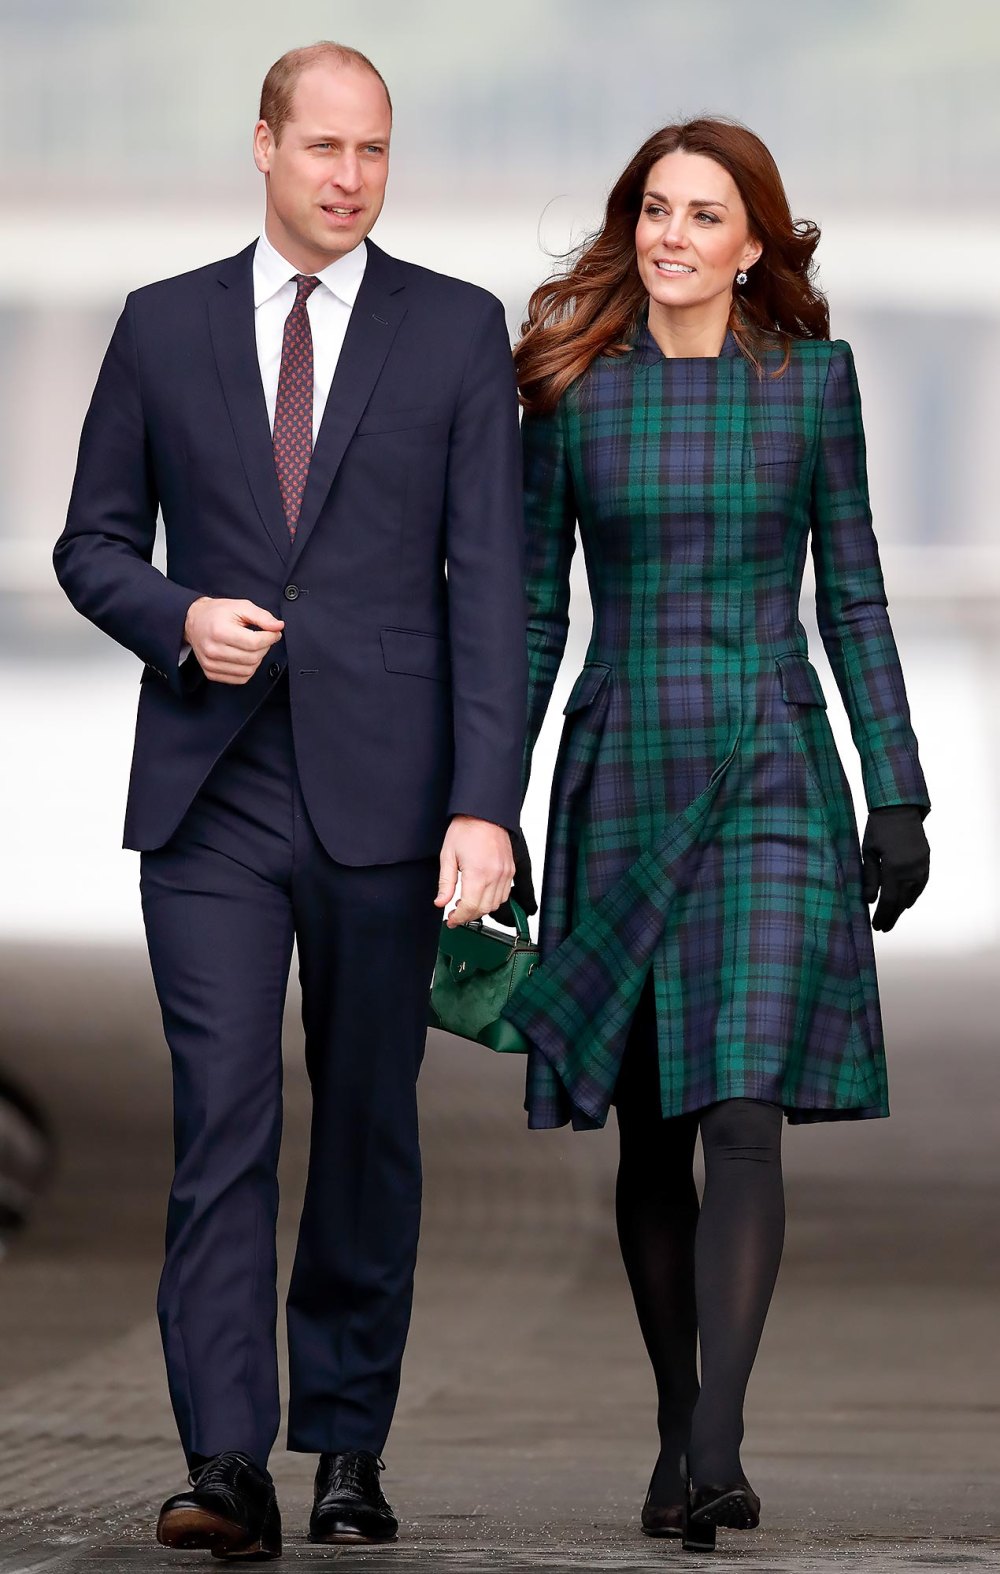 Prince William and Princess Kate Middleton Are ‘Embarrassed’ Over Holiday Card Photoshop Fail